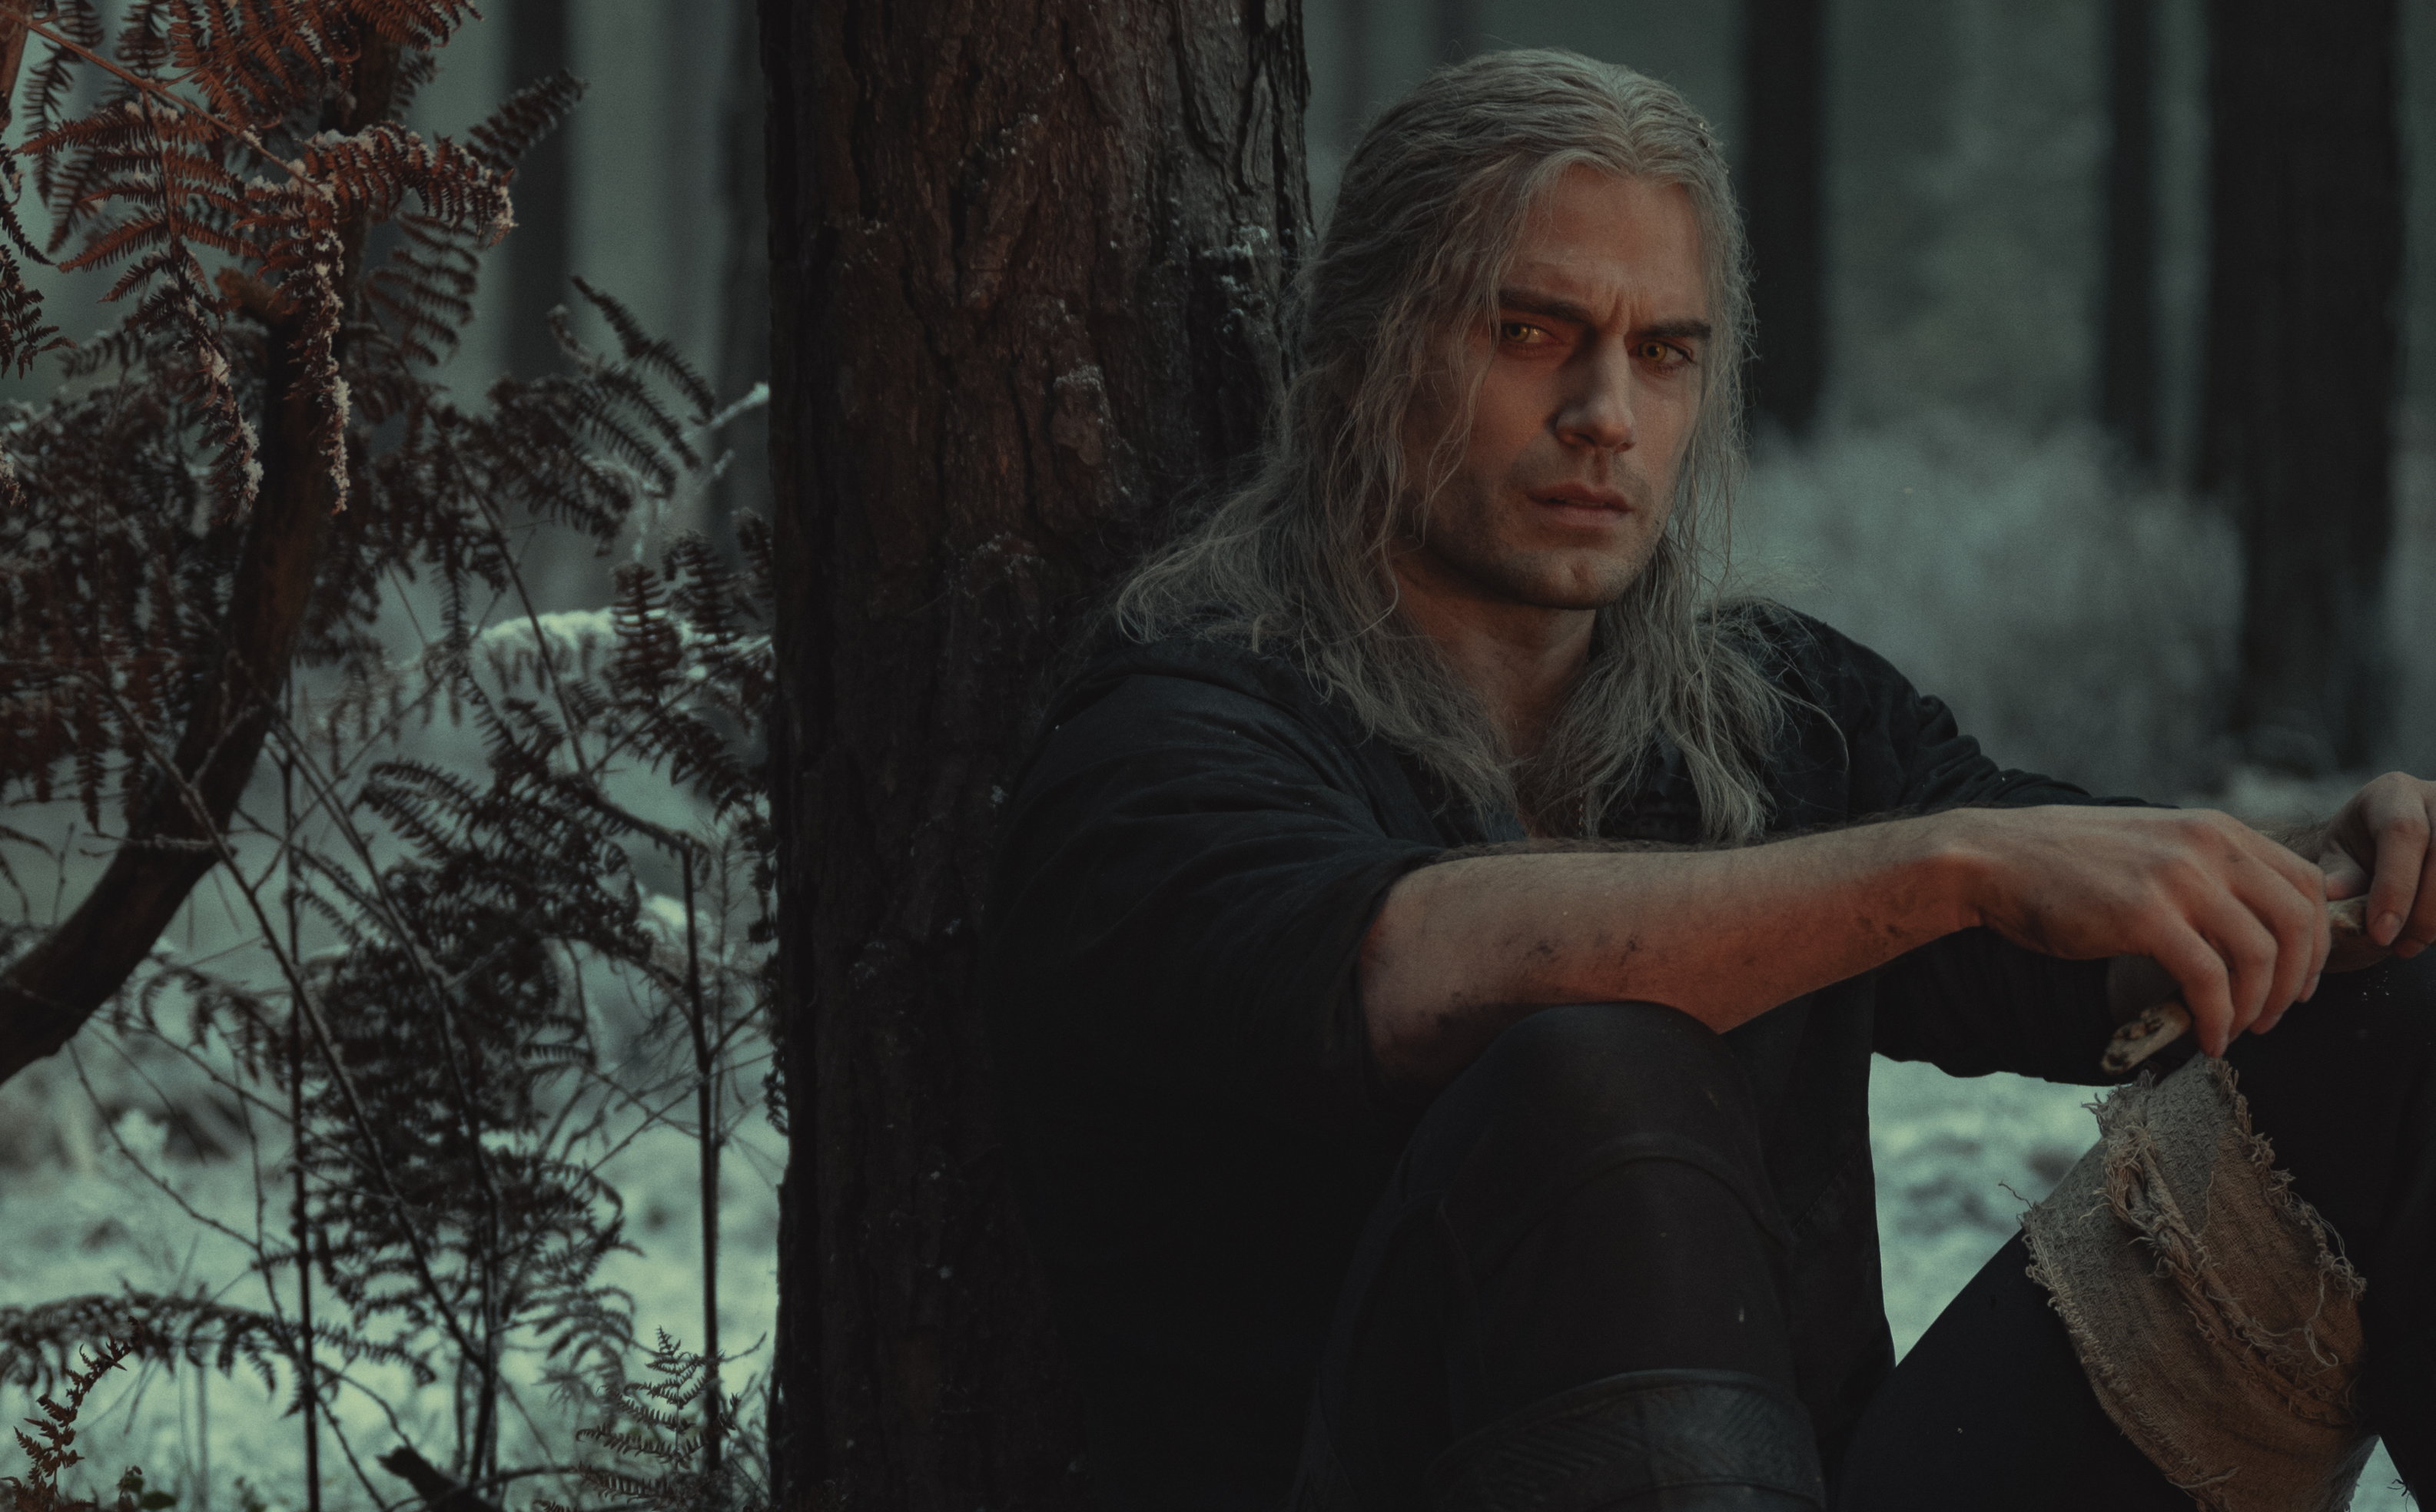 The Witcher 3 on Netflix: Season 3 available in Summer 2023